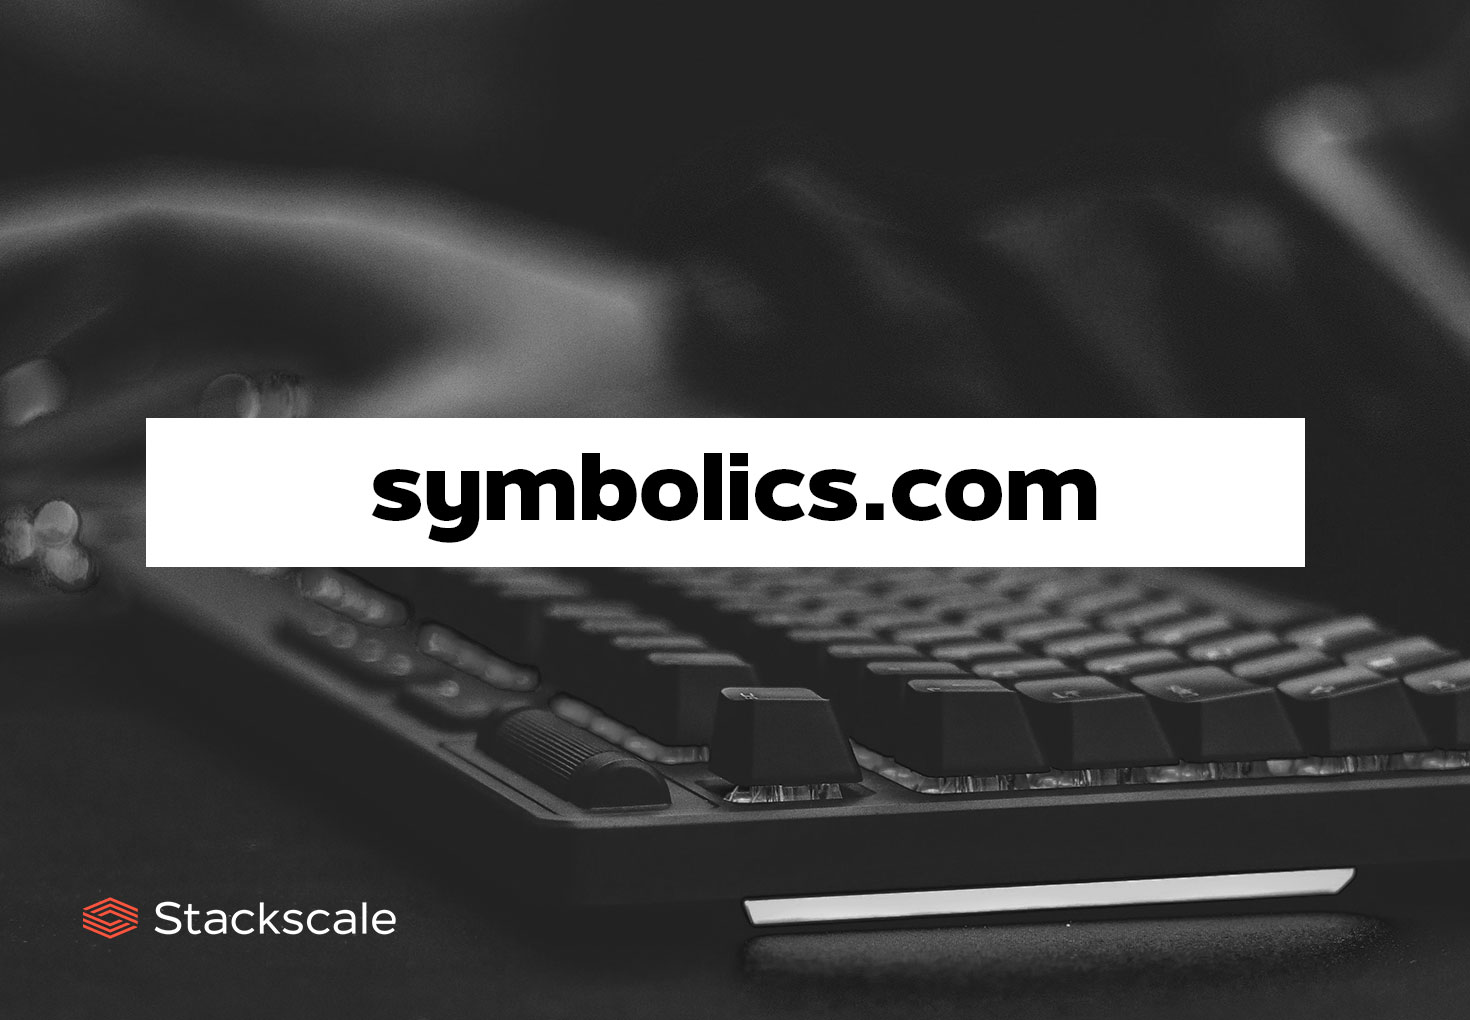 Symbolics.com is the first registered .com domain name on the Internet